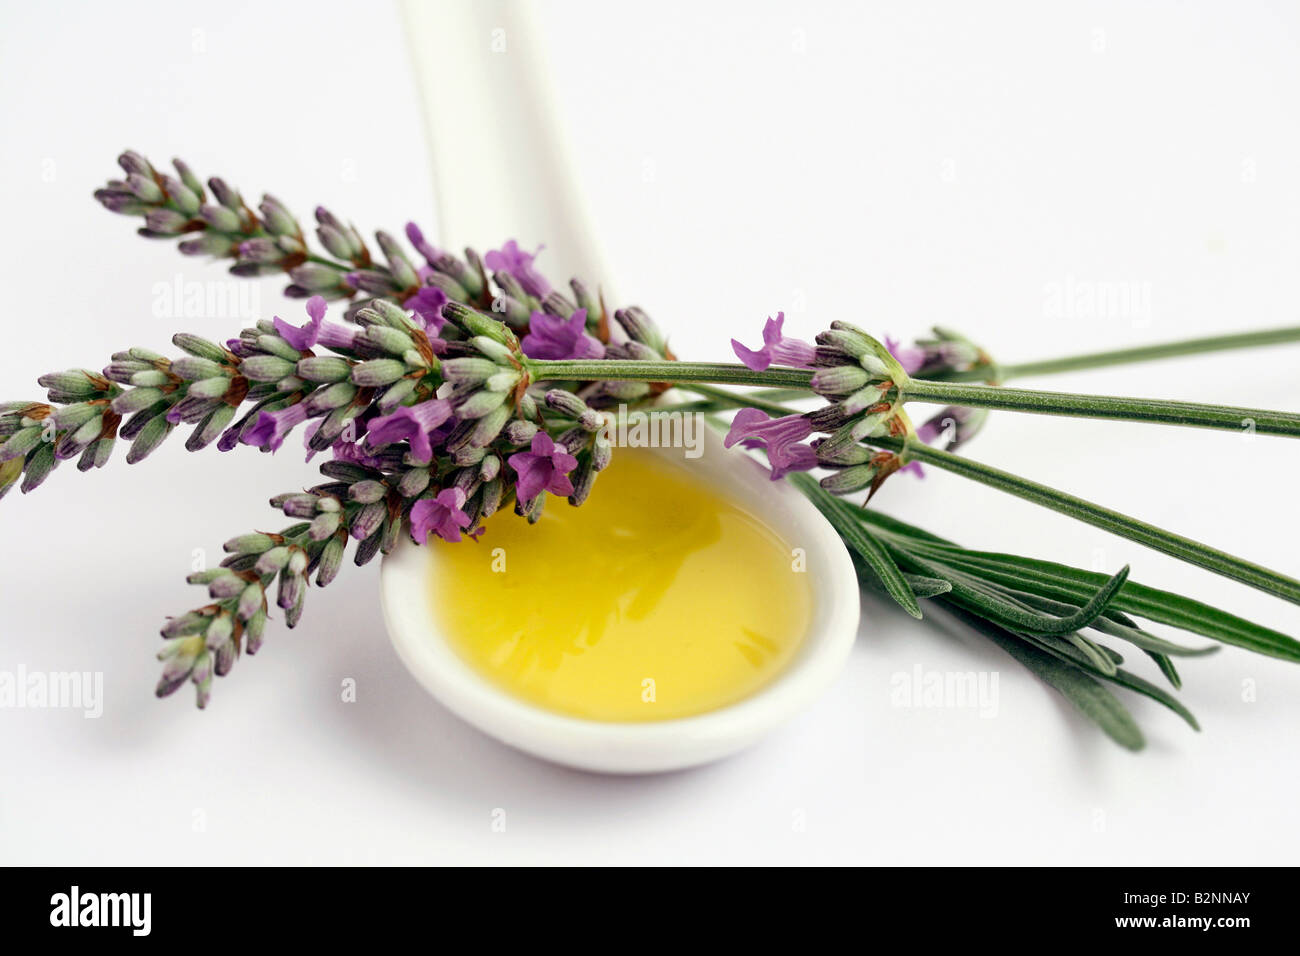 Lavender and essential oil Stock Photo